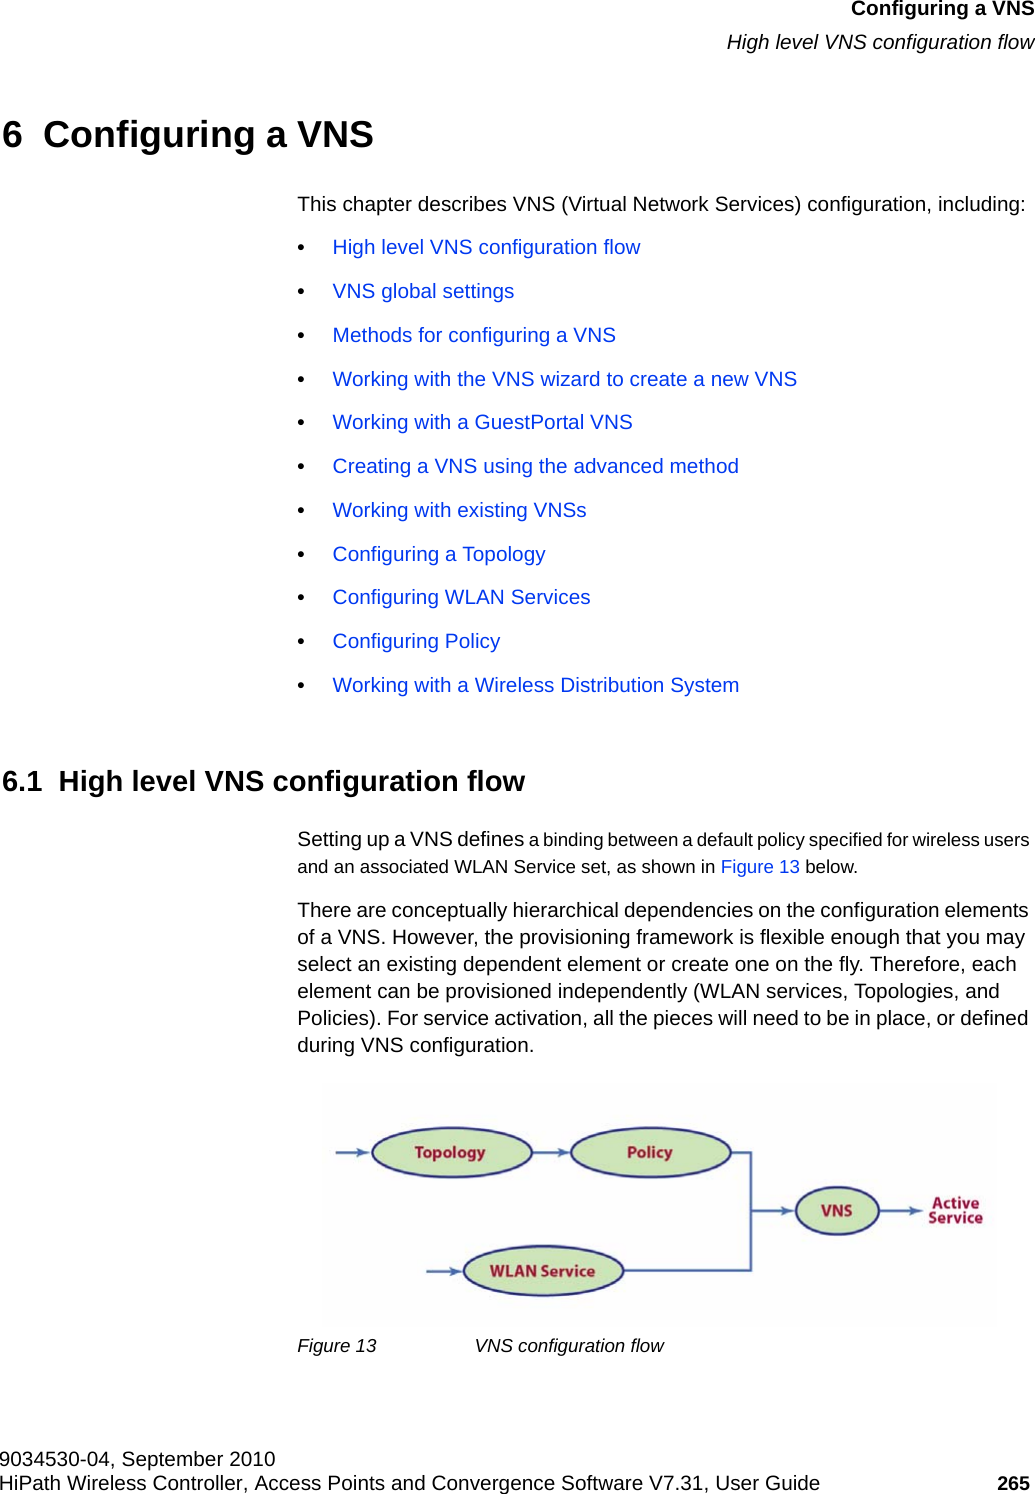 hwc_vnsconfiguration.fm9034530-04, September 2010HiPath Wireless Controller, Access Points and Convergence Software V7.31, User Guide 265      Configuring a VNSHigh level VNS configuration flow6  Configuring a VNSThis chapter describes VNS (Virtual Network Services) configuration, including:•High level VNS configuration flow•VNS global settings•Methods for configuring a VNS•Working with the VNS wizard to create a new VNS•Working with a GuestPortal VNS•Creating a VNS using the advanced method•Working with existing VNSs•Configuring a Topology•Configuring WLAN Services•Configuring Policy•Working with a Wireless Distribution System6.1  High level VNS configuration flowSetting up a VNS defines a binding between a default policy specified for wireless users and an associated WLAN Service set, as shown in Figure 13 below.There are conceptually hierarchical dependencies on the configuration elements of a VNS. However, the provisioning framework is flexible enough that you may select an existing dependent element or create one on the fly. Therefore, each element can be provisioned independently (WLAN services, Topologies, and Policies). For service activation, all the pieces will need to be in place, or defined during VNS configuration.Figure 13 VNS configuration flow